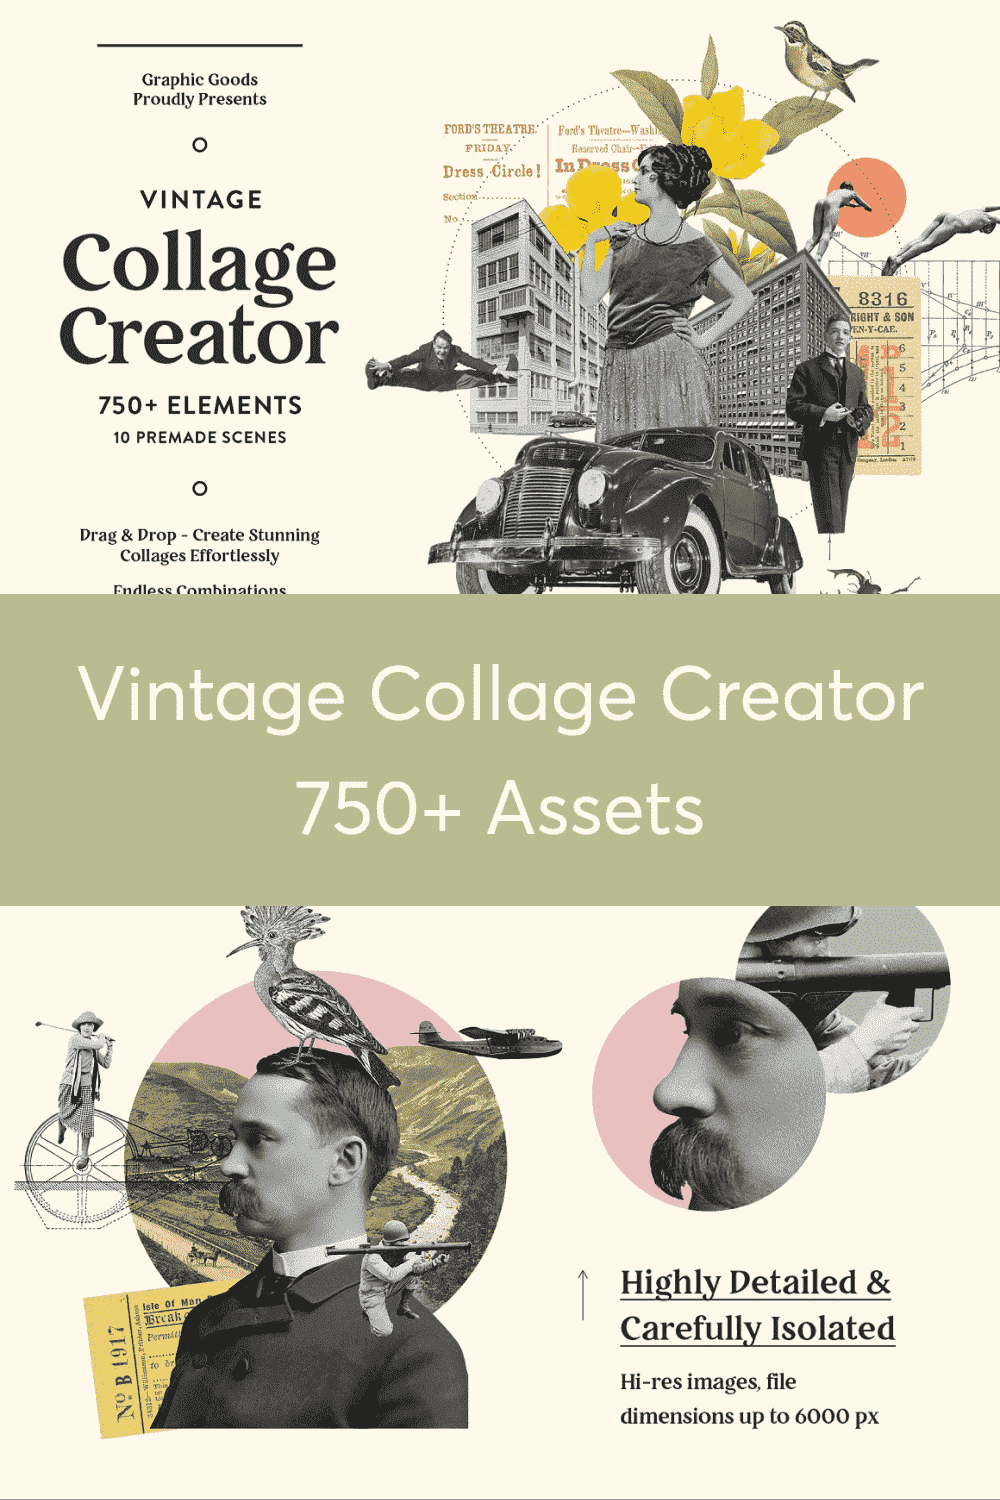 Vintage Collage Creator 750+ Assets - Highly Detailed Carefully Isolated.